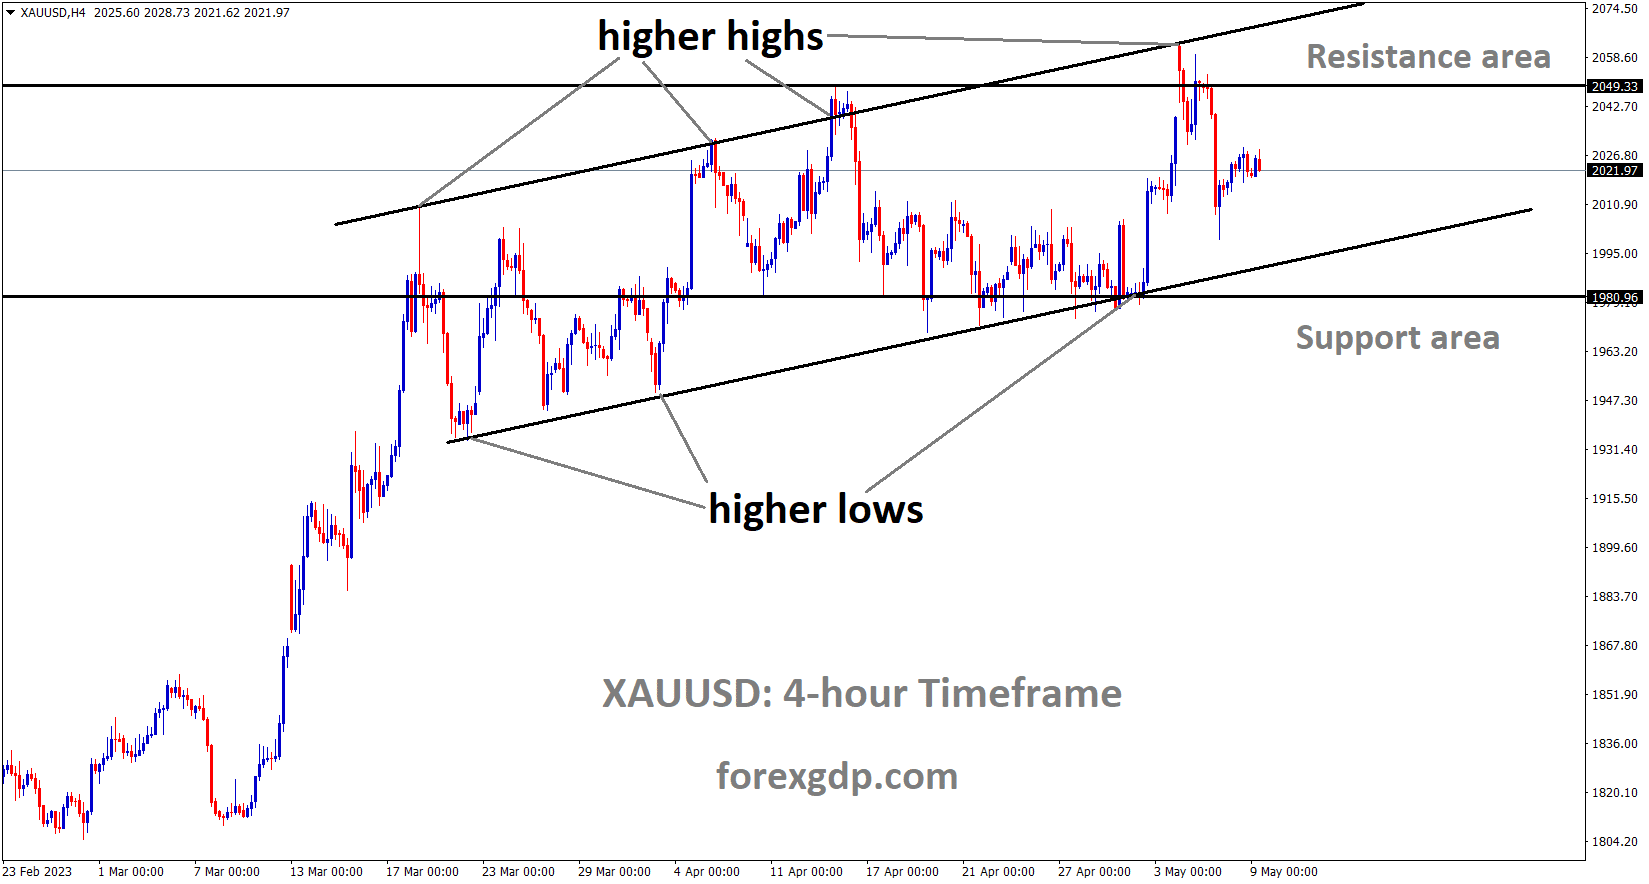 XAUUSD Gold price is moving in an Ascending channel and Box pattern Market is falling from the higher high area of the channel and resistance area of the pattern.